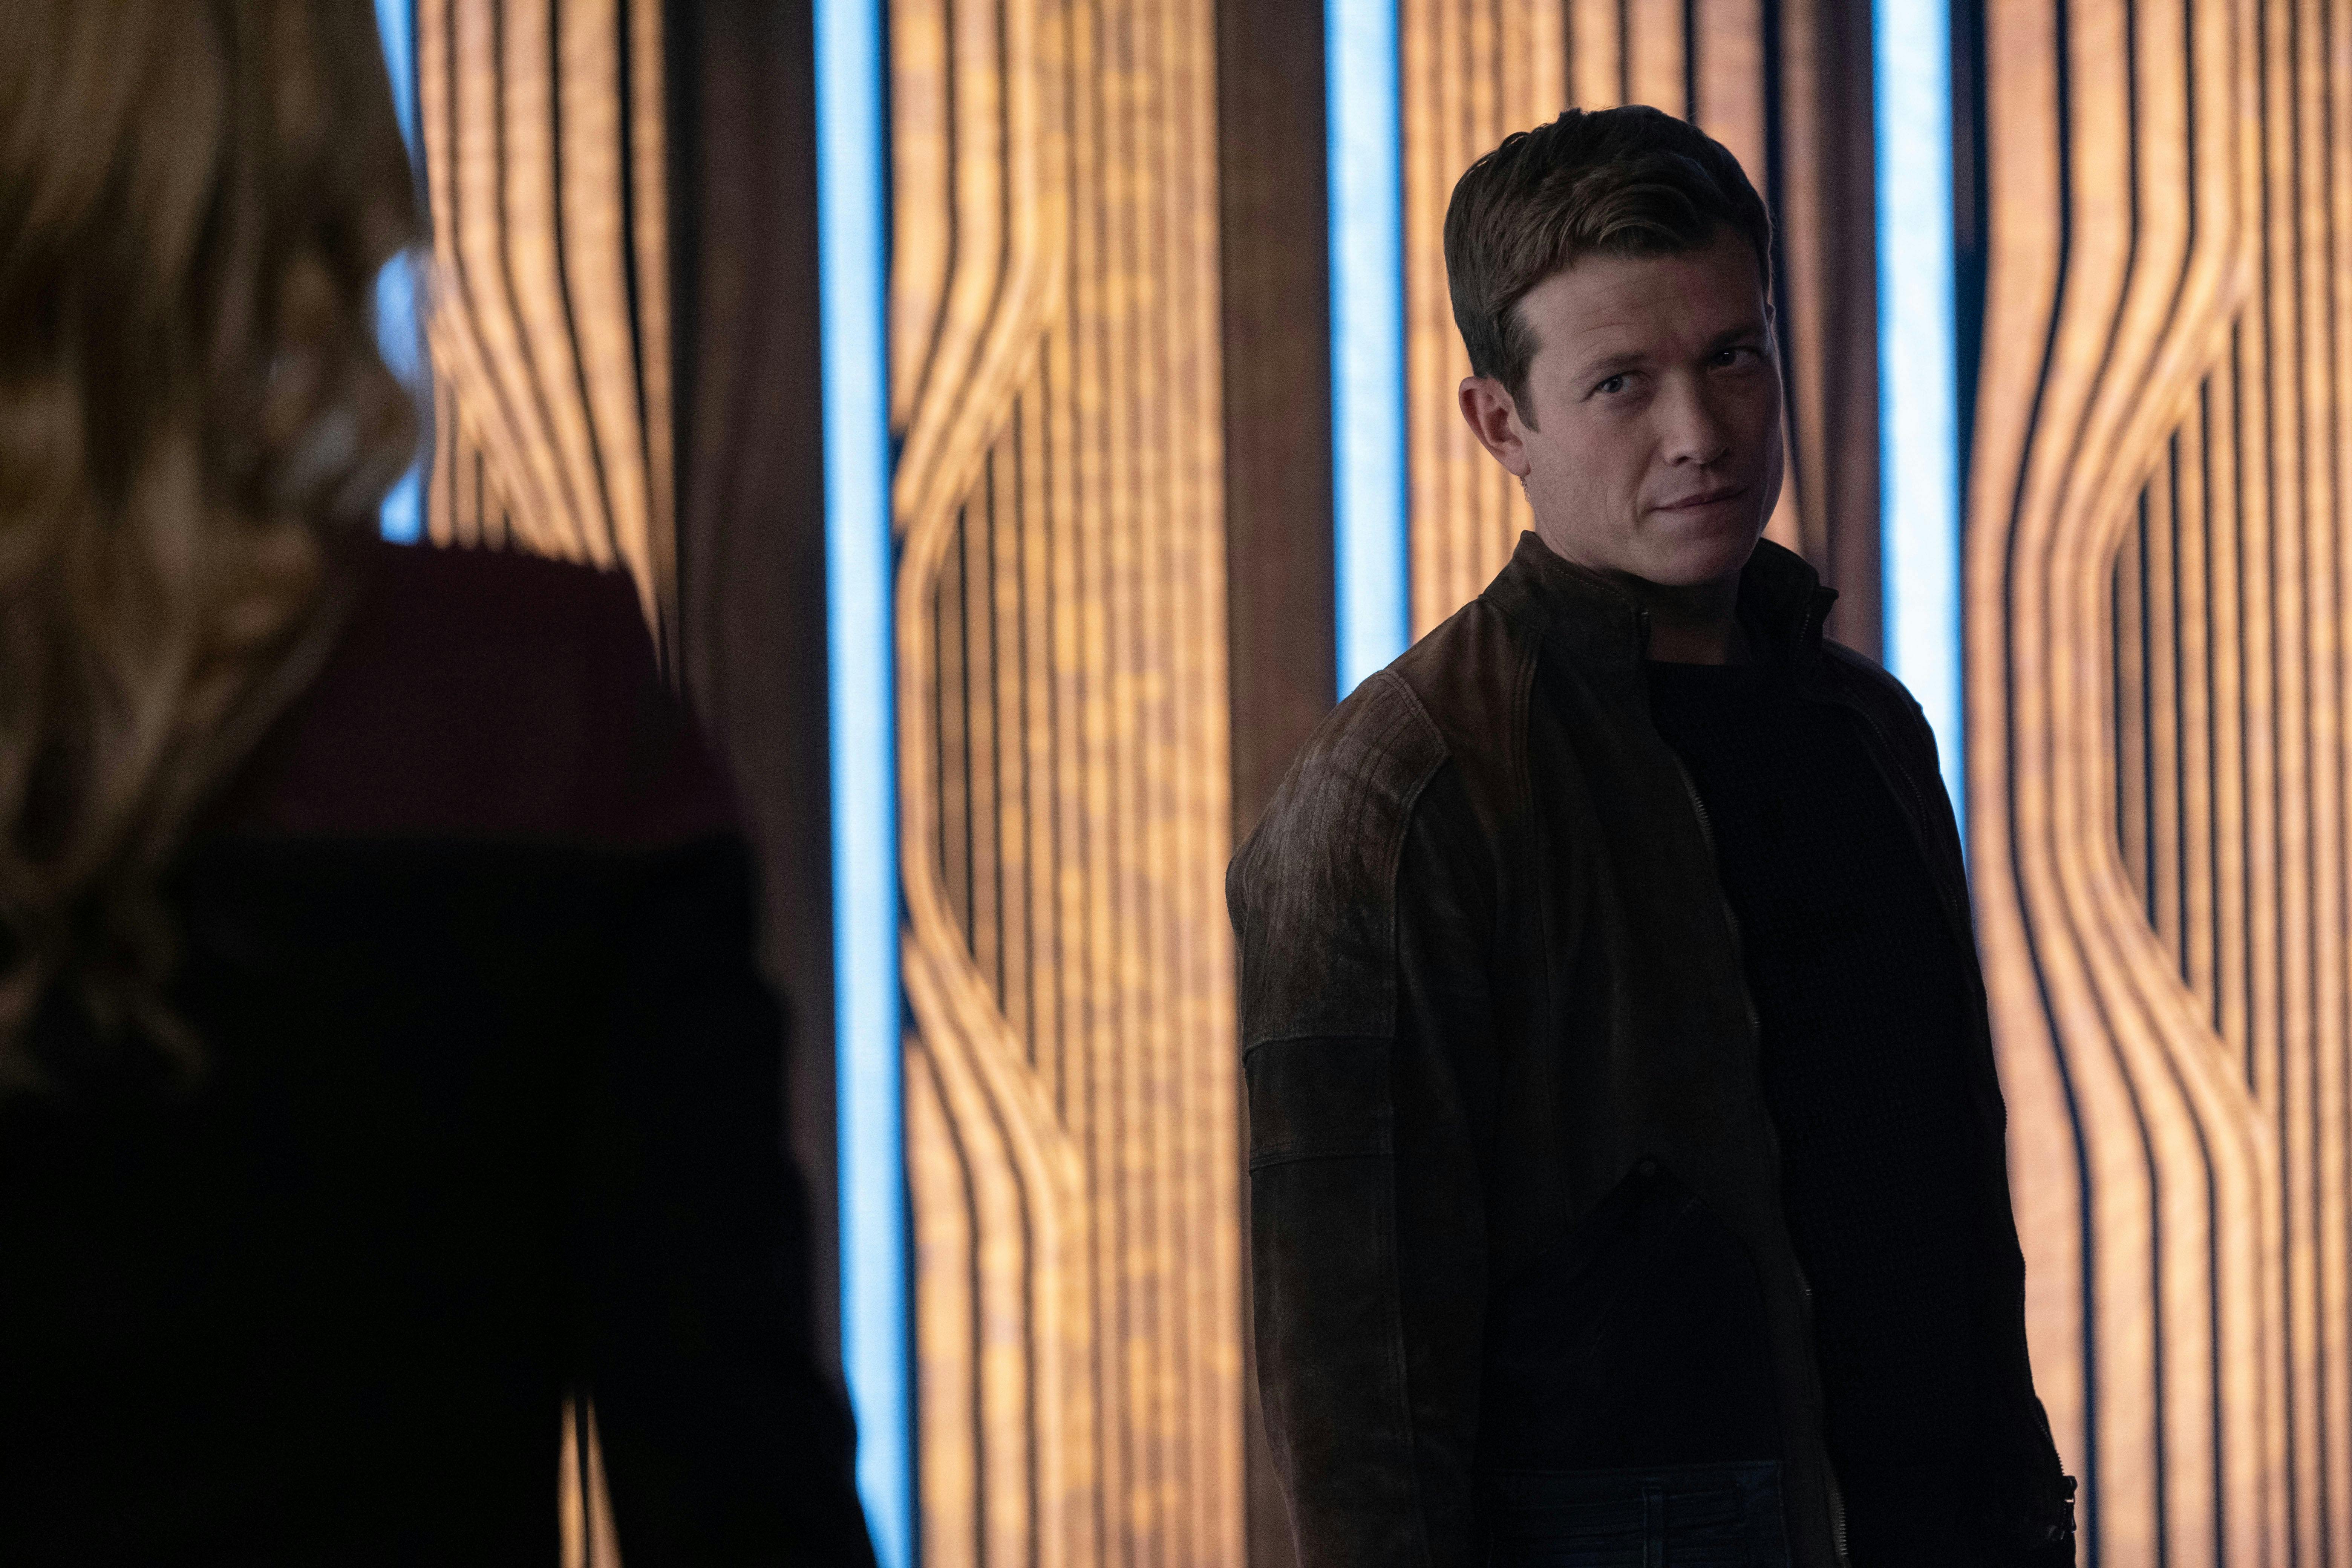 Ed Speelers as Jack looks towards Seven while standing on a transporter on Star Trek: Picard